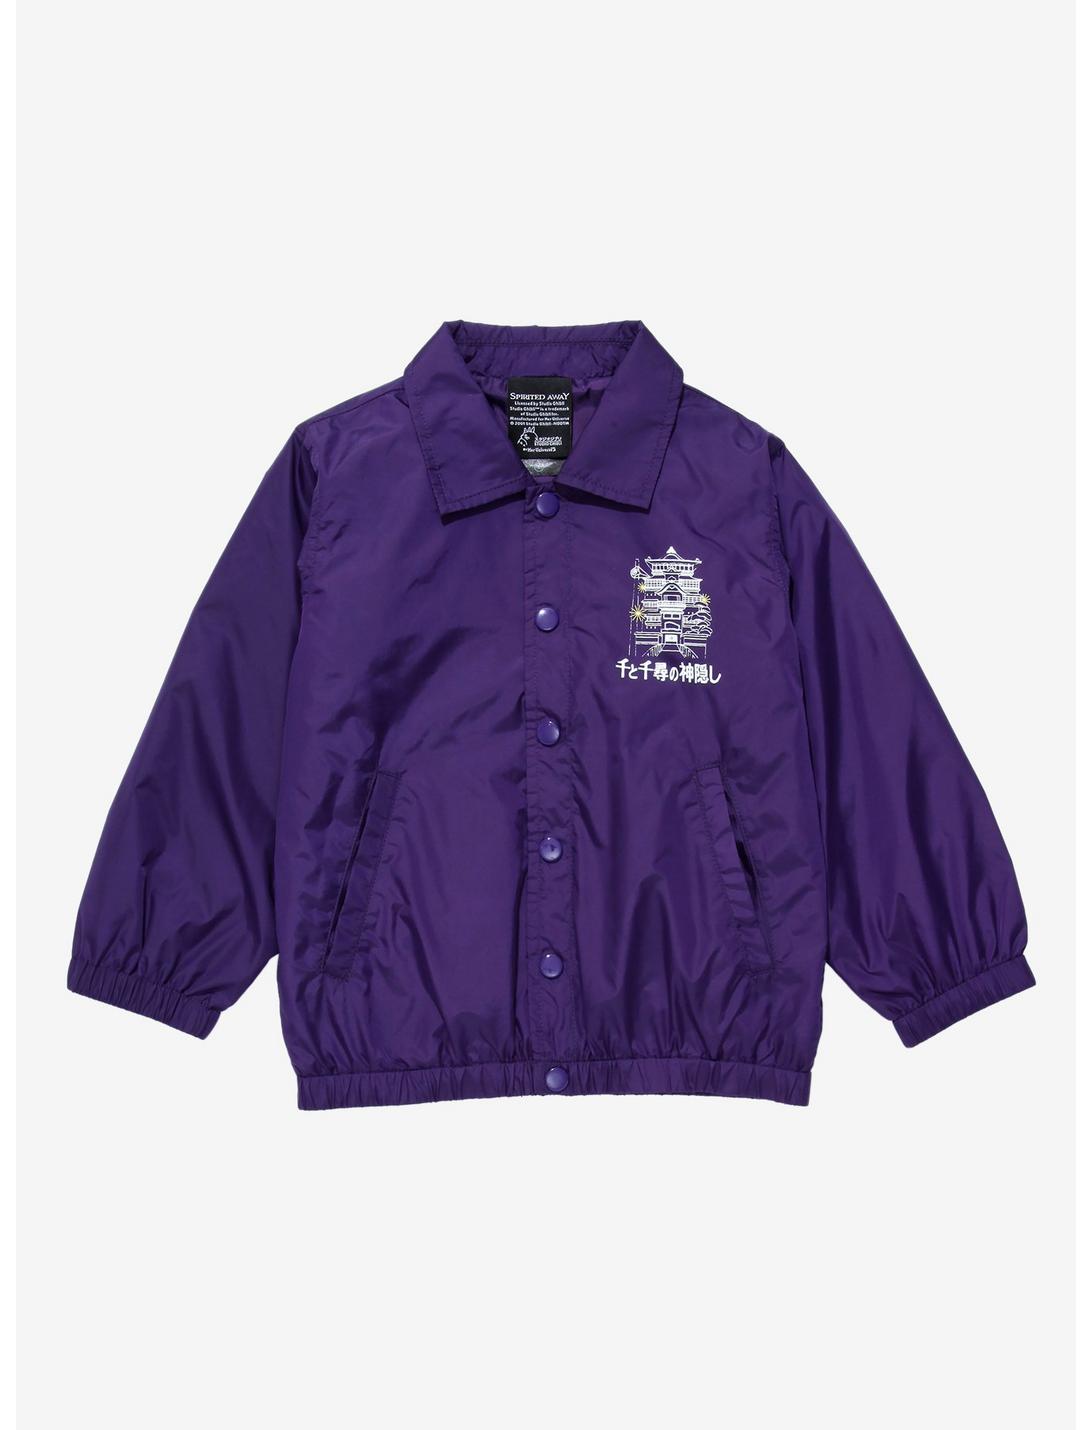 Her Universe Studio Ghibli Spirited Away Bathhouse Toddler Coach's Jacket - BoxLunch Exclusive, PURPLE, hi-res